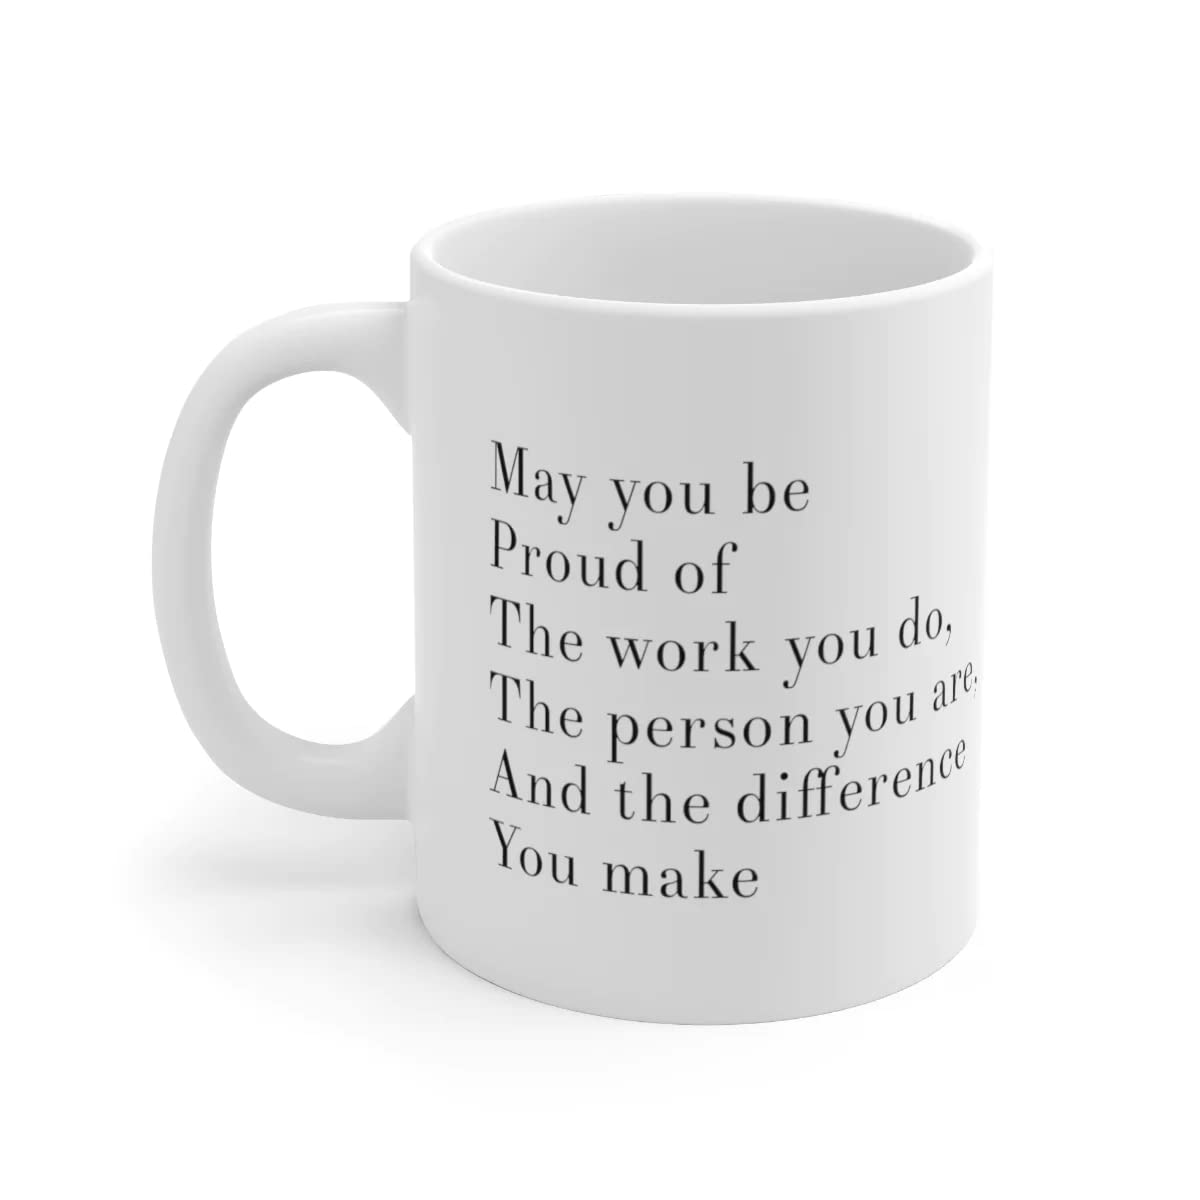 May You Be Proud Of The Work You Do The Person You Are The Difference You Make Inspirational Gift Ceramic Mug (11 oz, White)